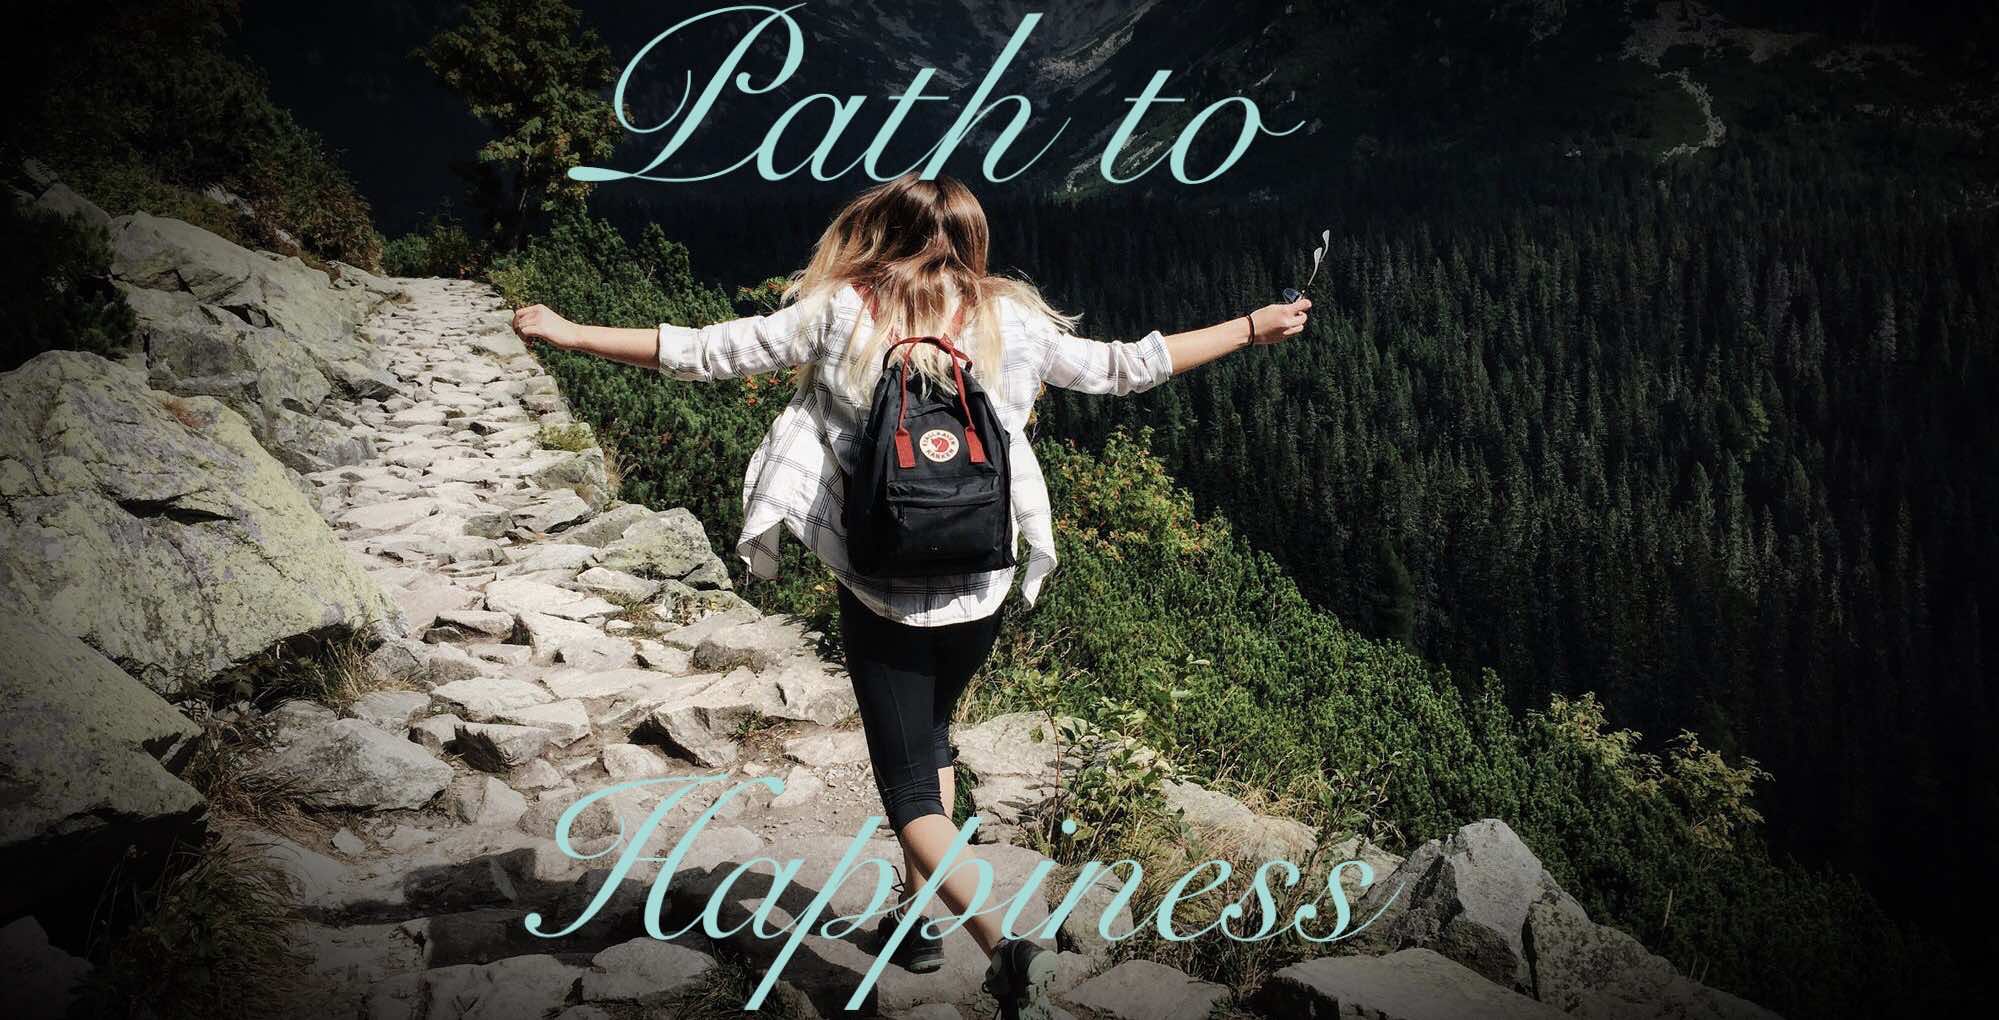 Path to happiness